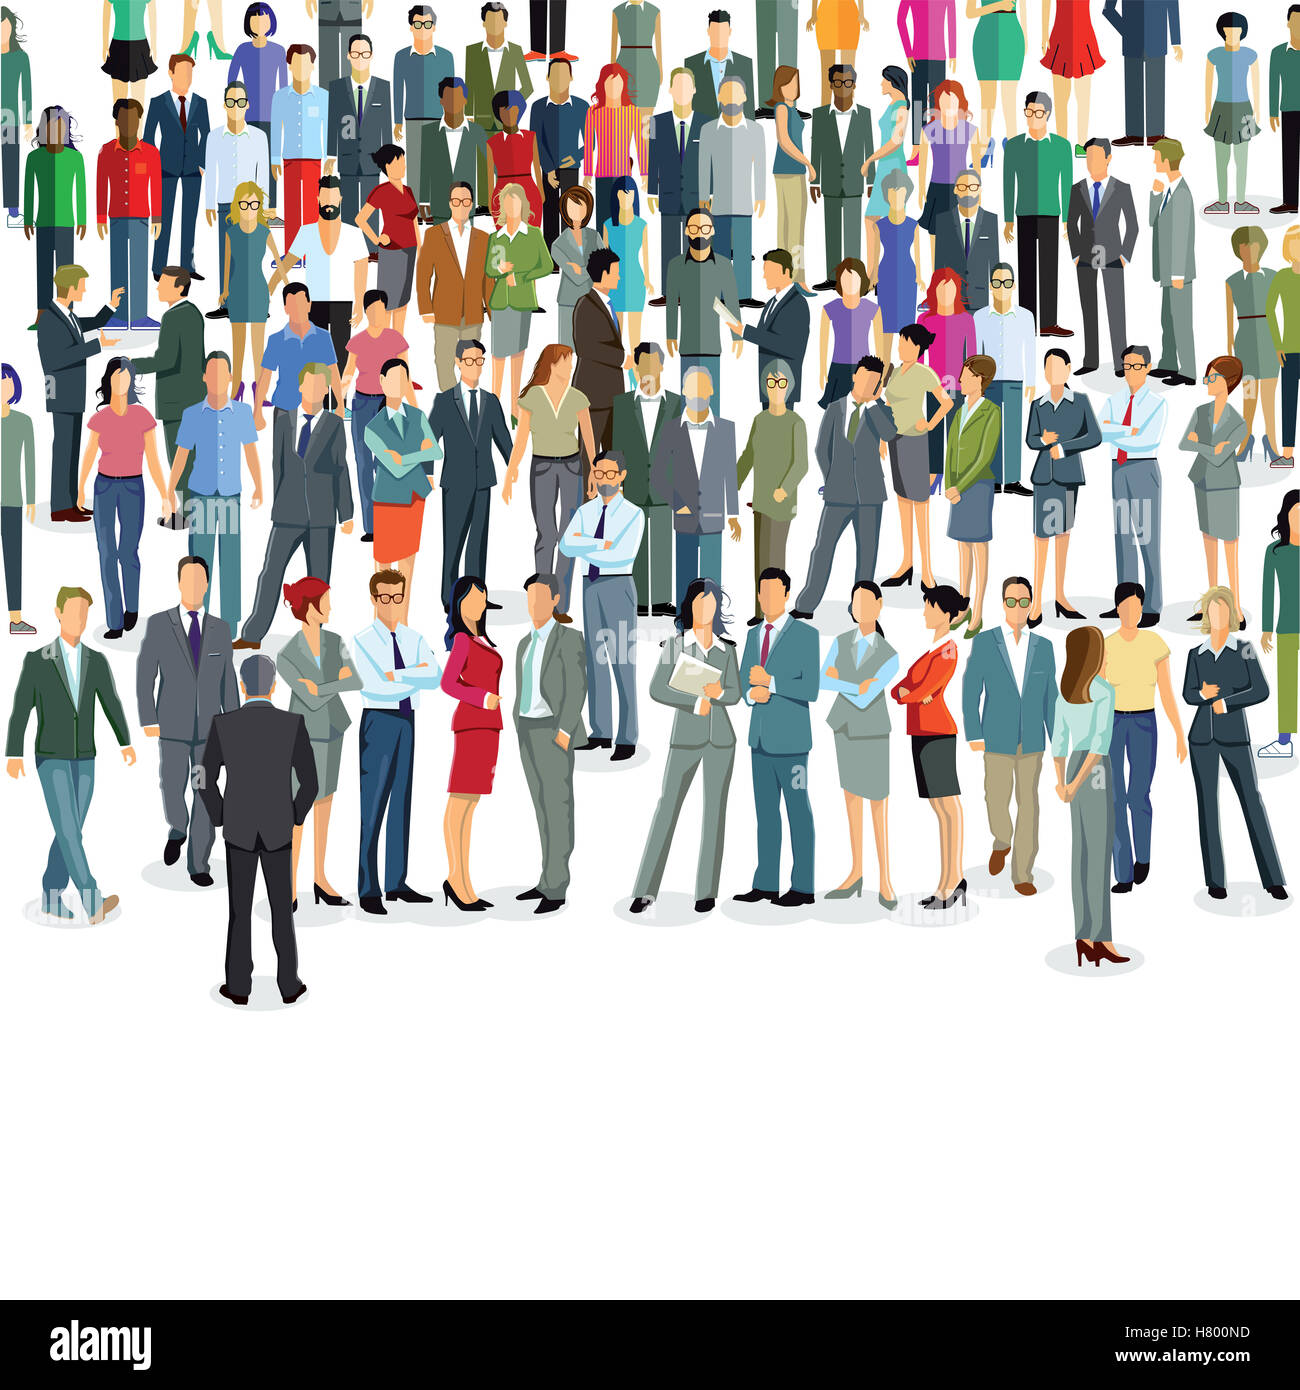 Large group of people Stock Photo